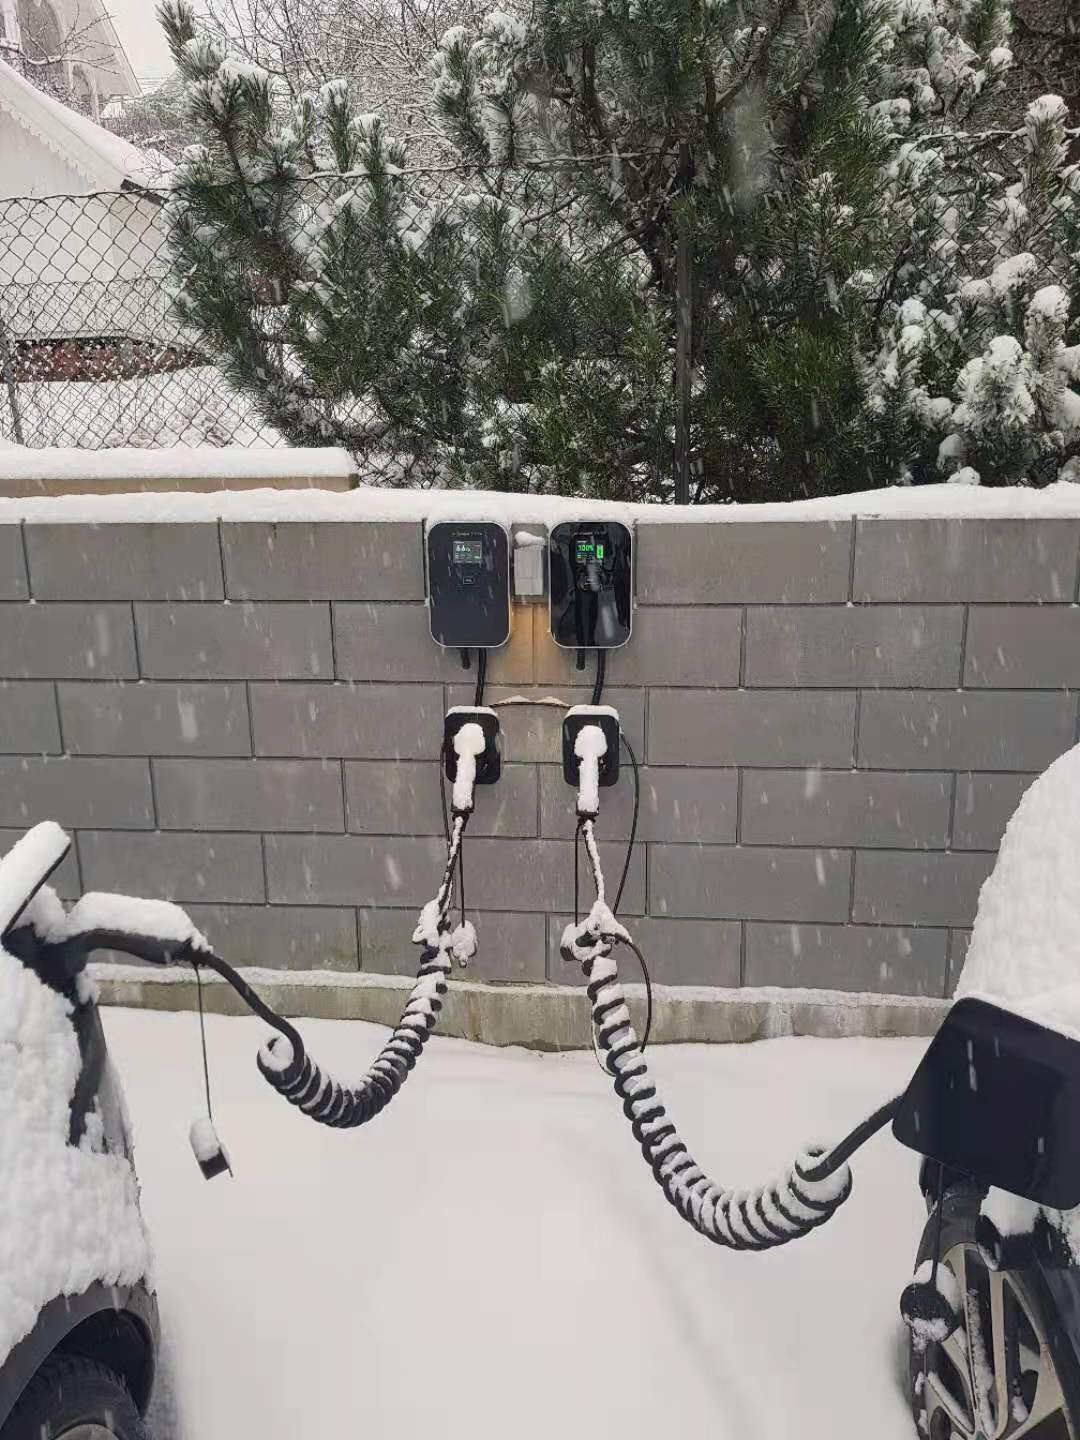 evseODM charging station in snow